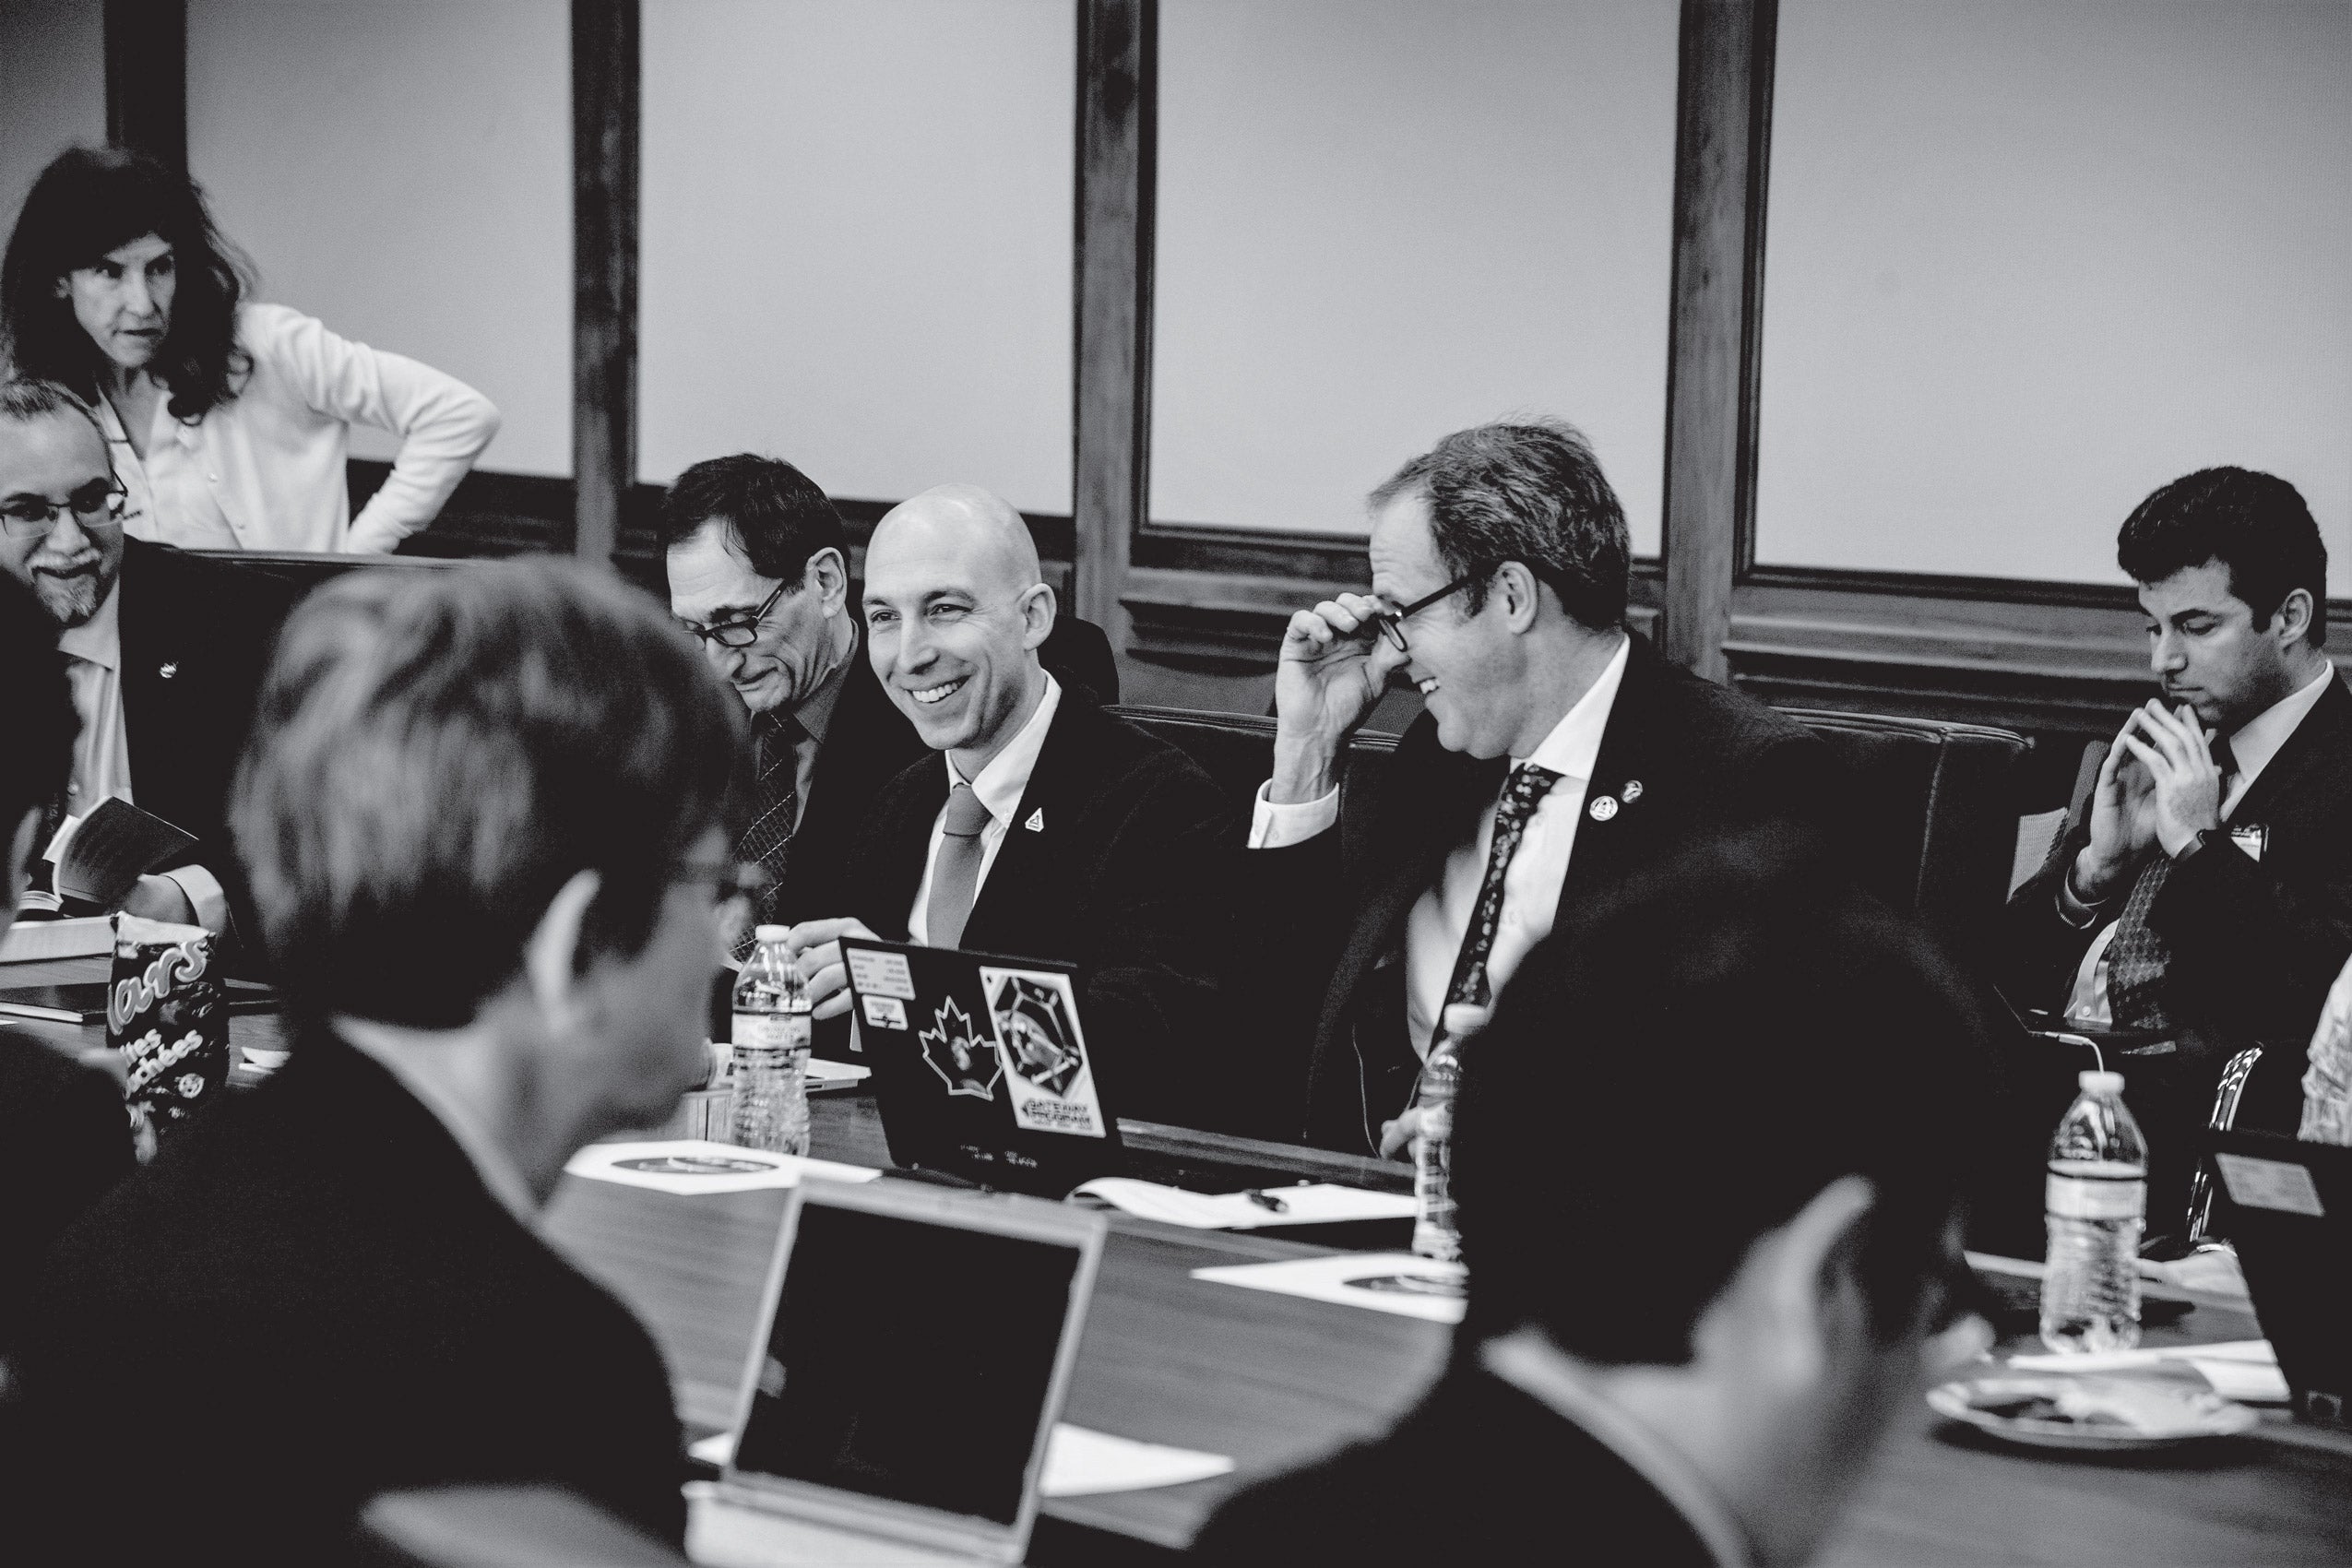 Black and white photo of a group of people at a conference table